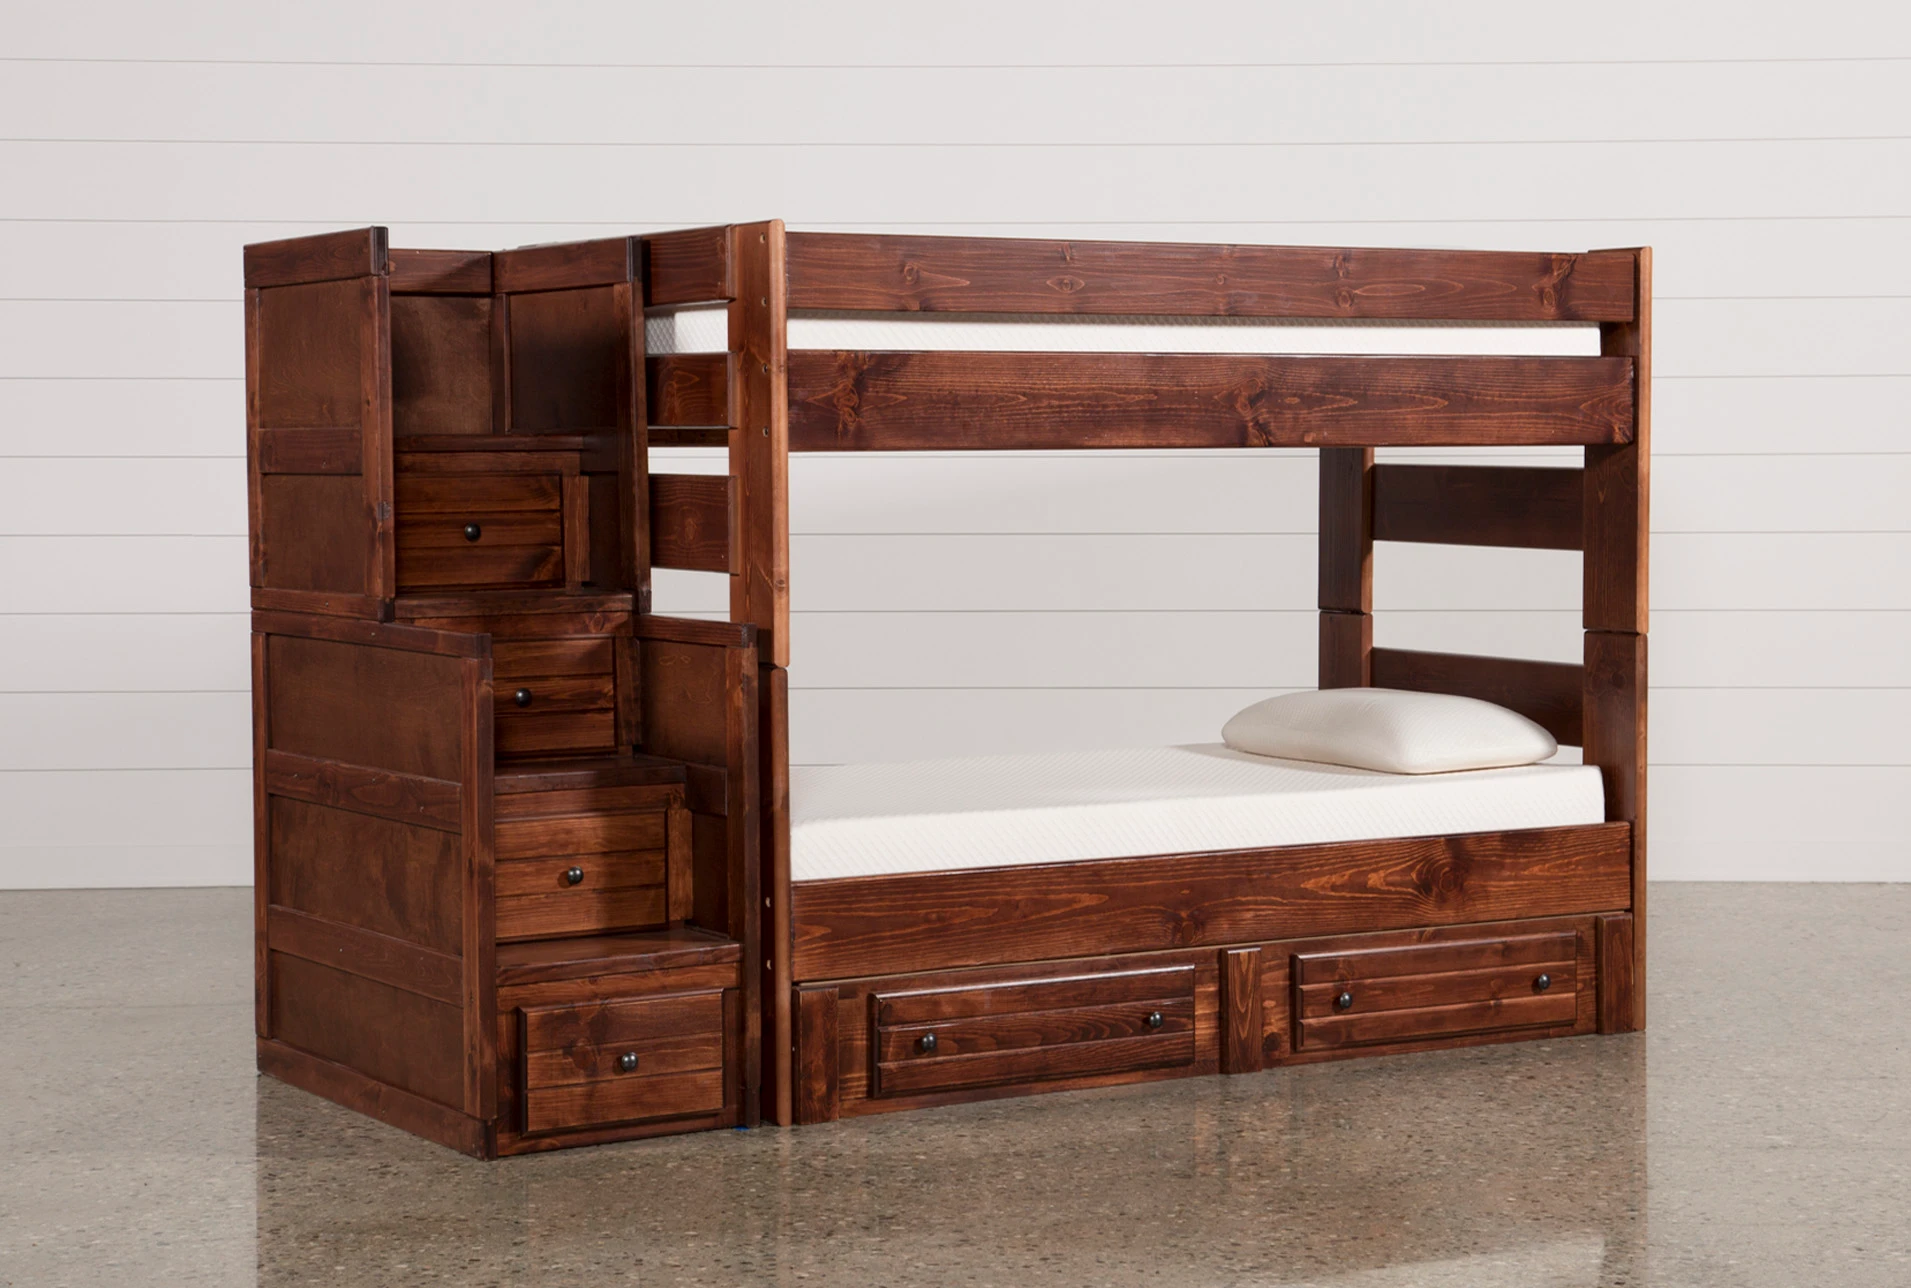 Bunk Bed With Stairs And Storage, Wooden Bunk Beds With Stairs And Drawers